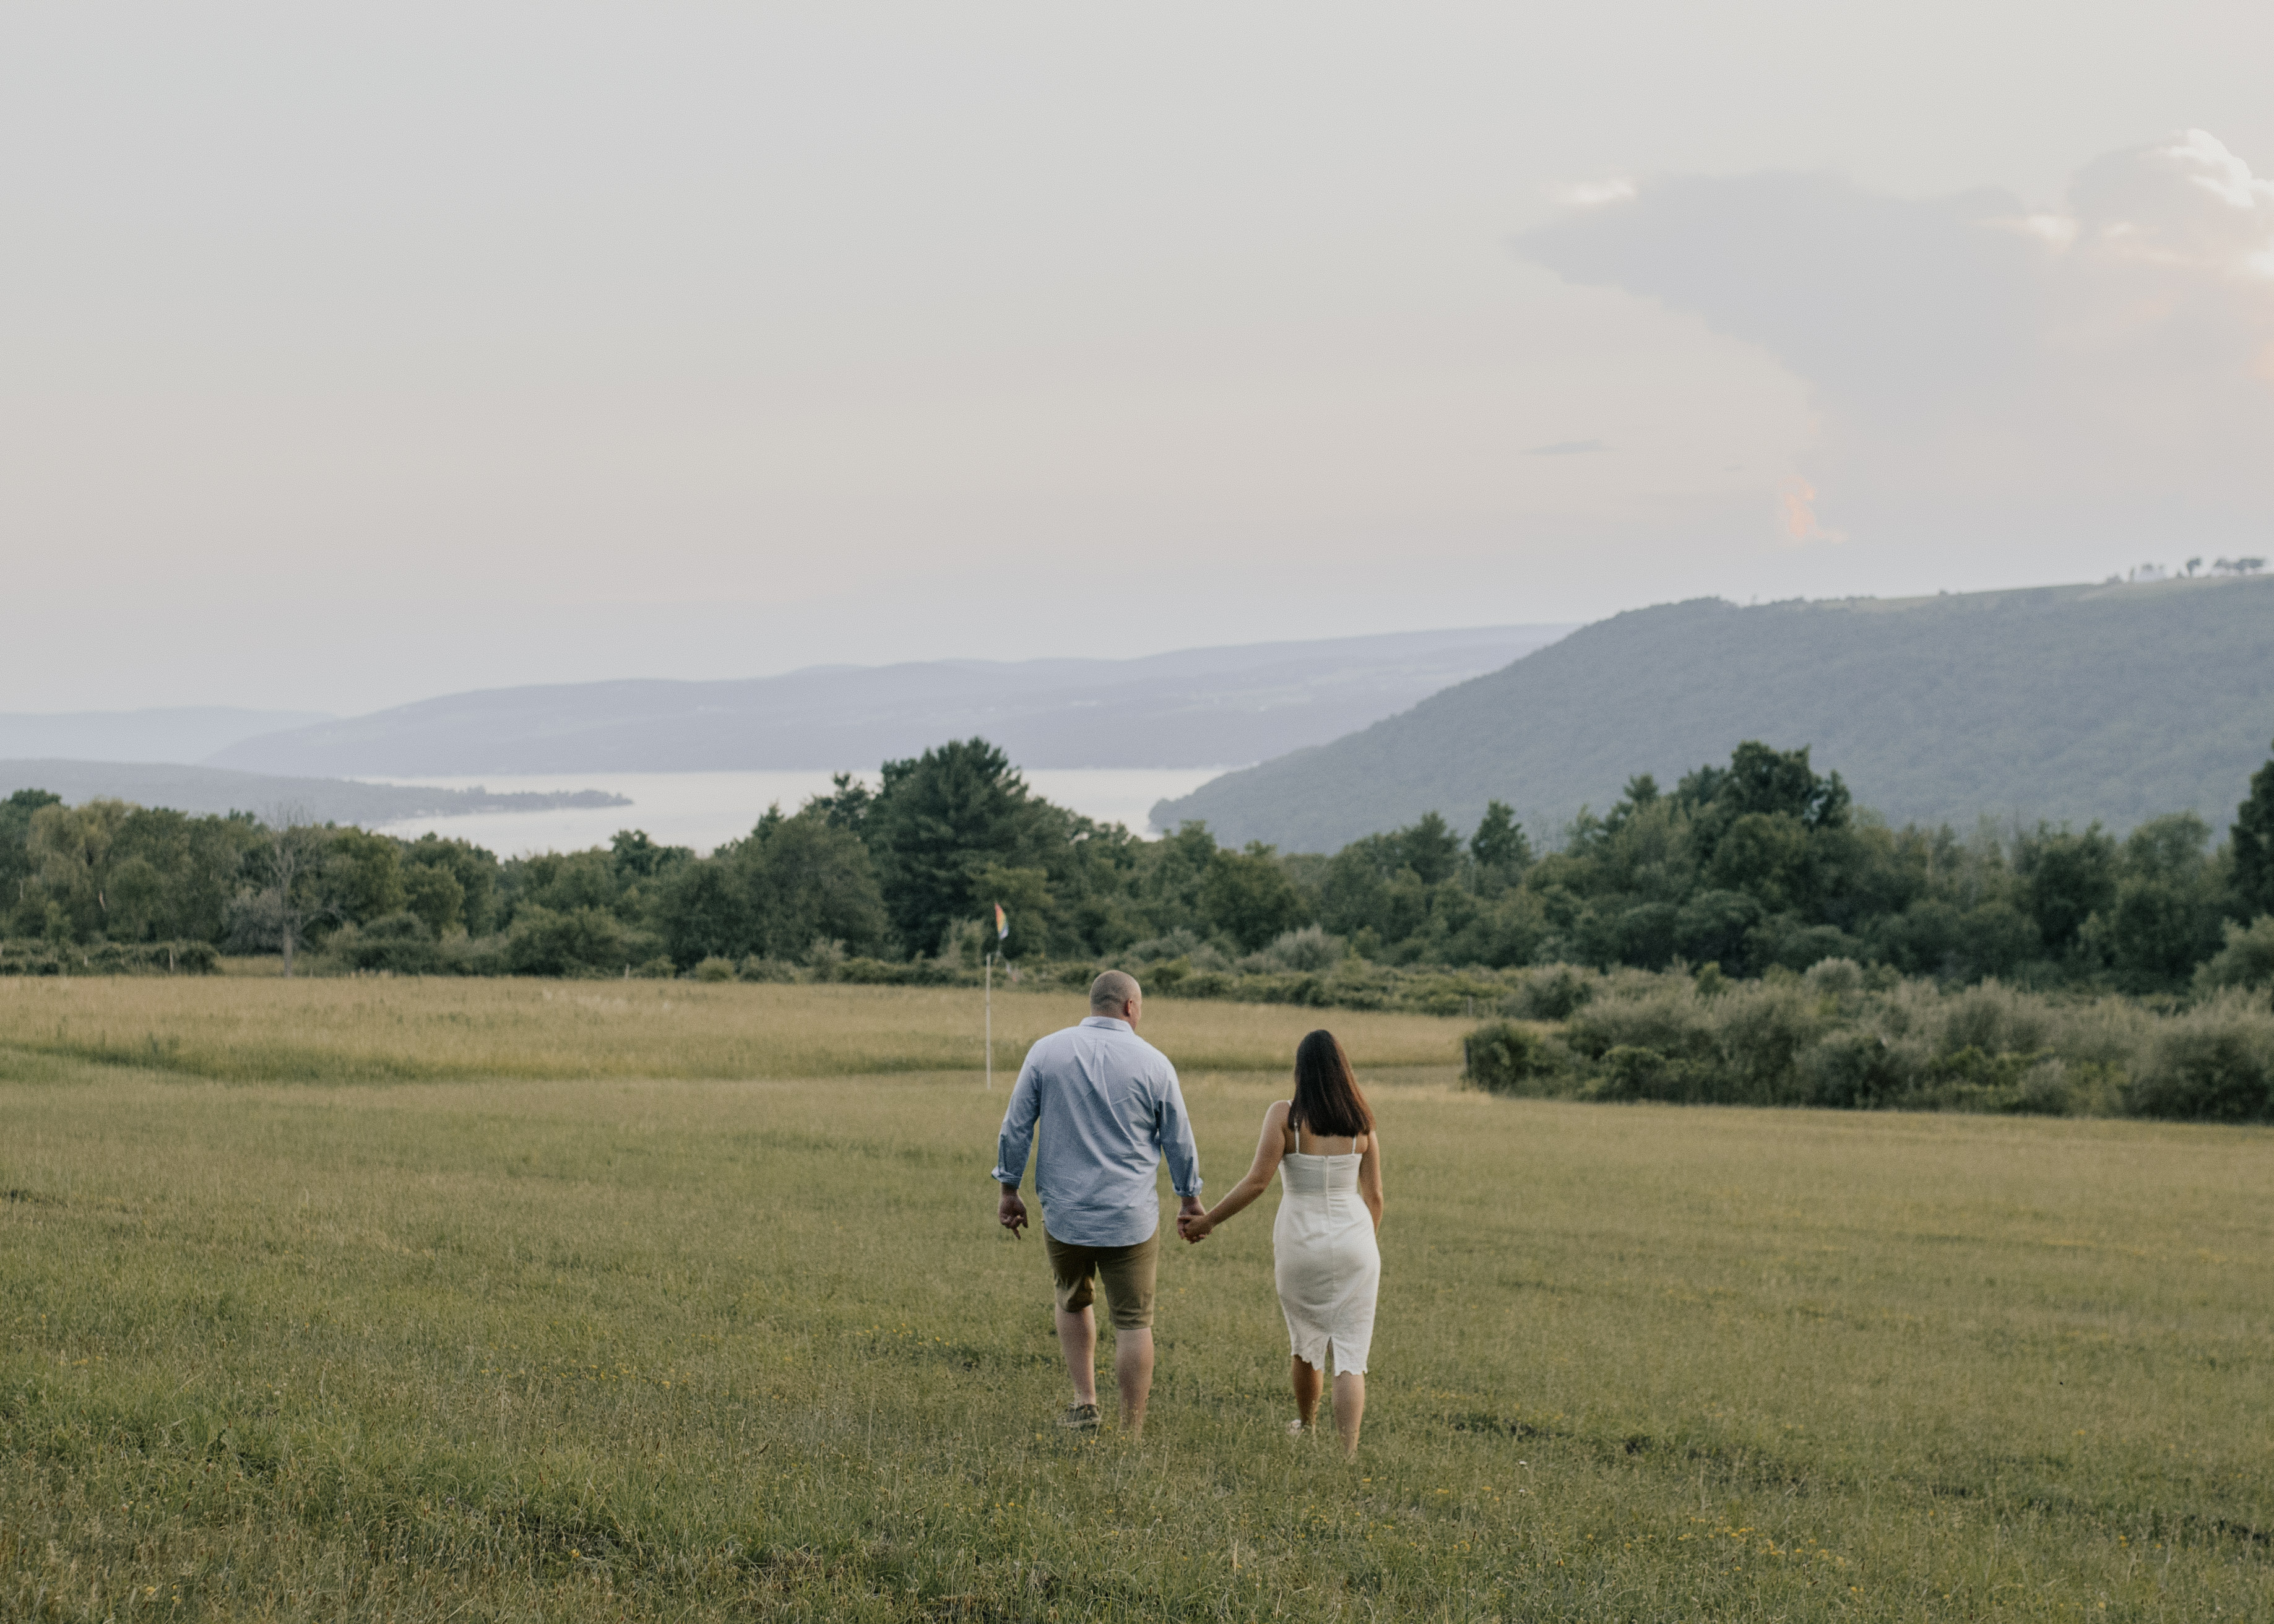 engagement session locations, finger lakes ny